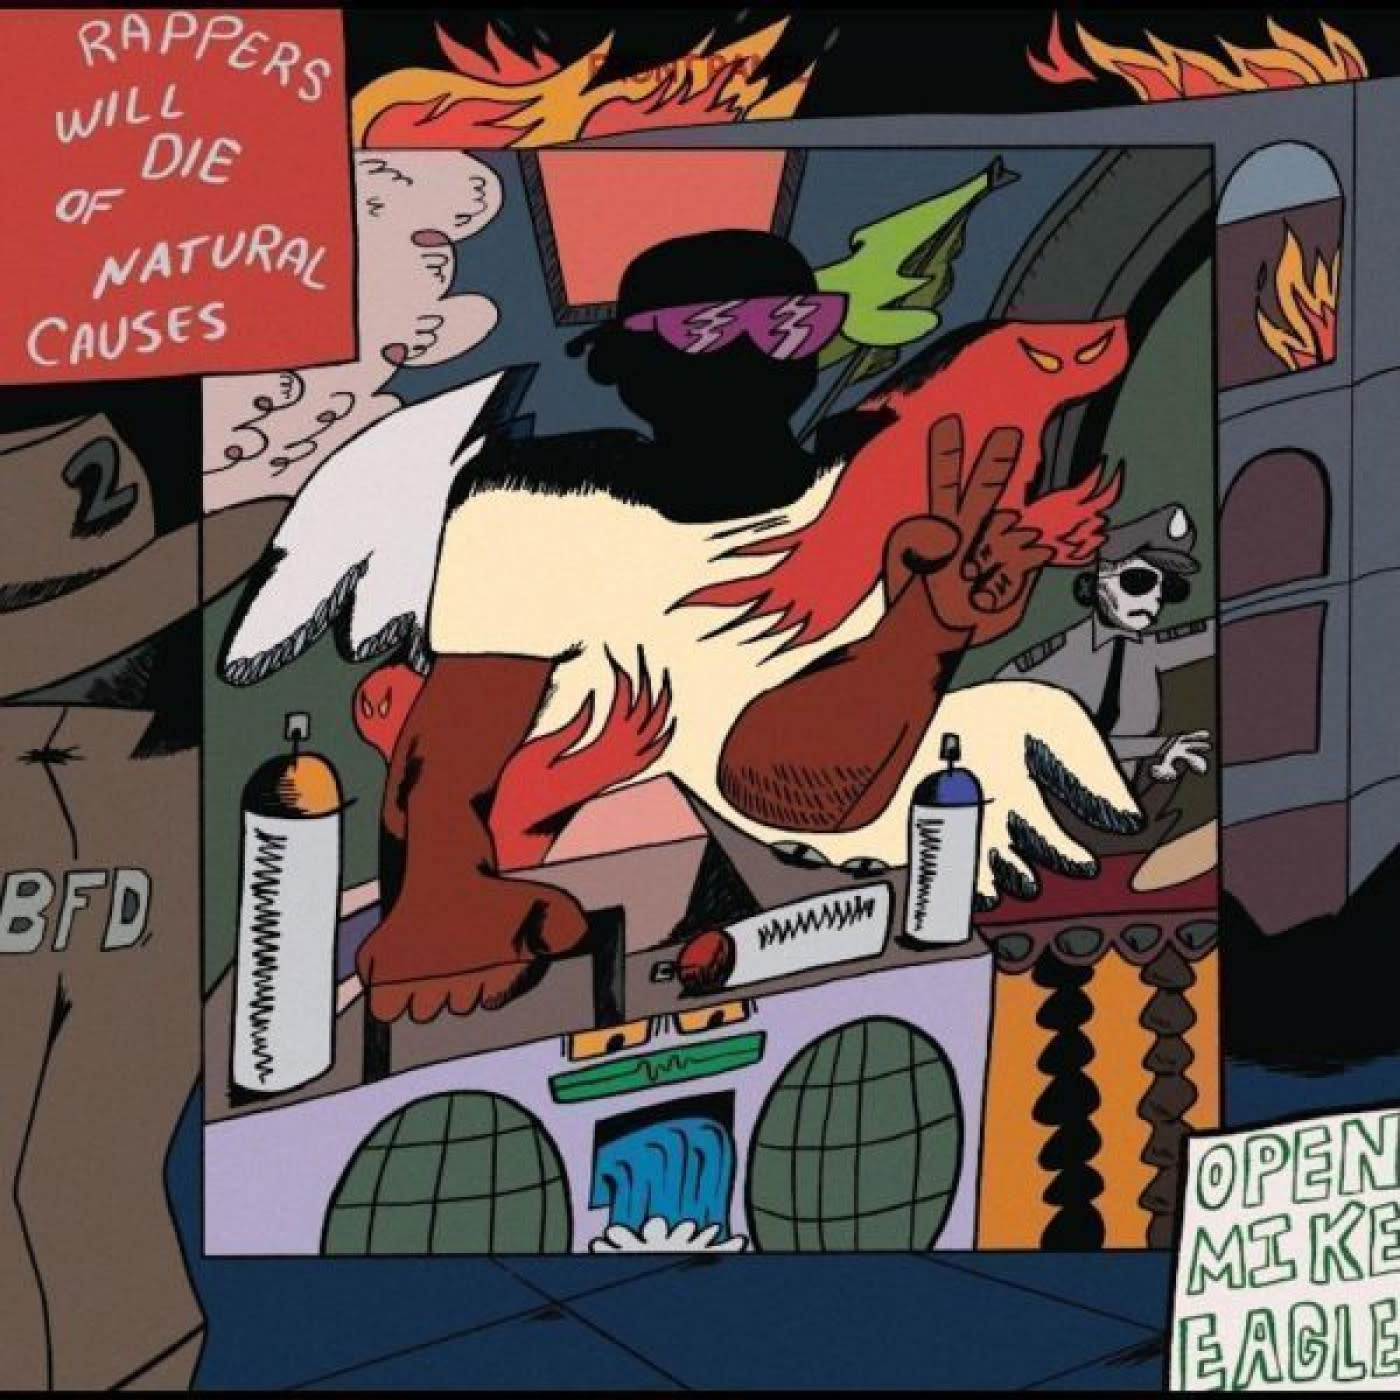 Open Mike Eagle - Rappers Will Die Of Natural Causes (10th Anniversary Edition)